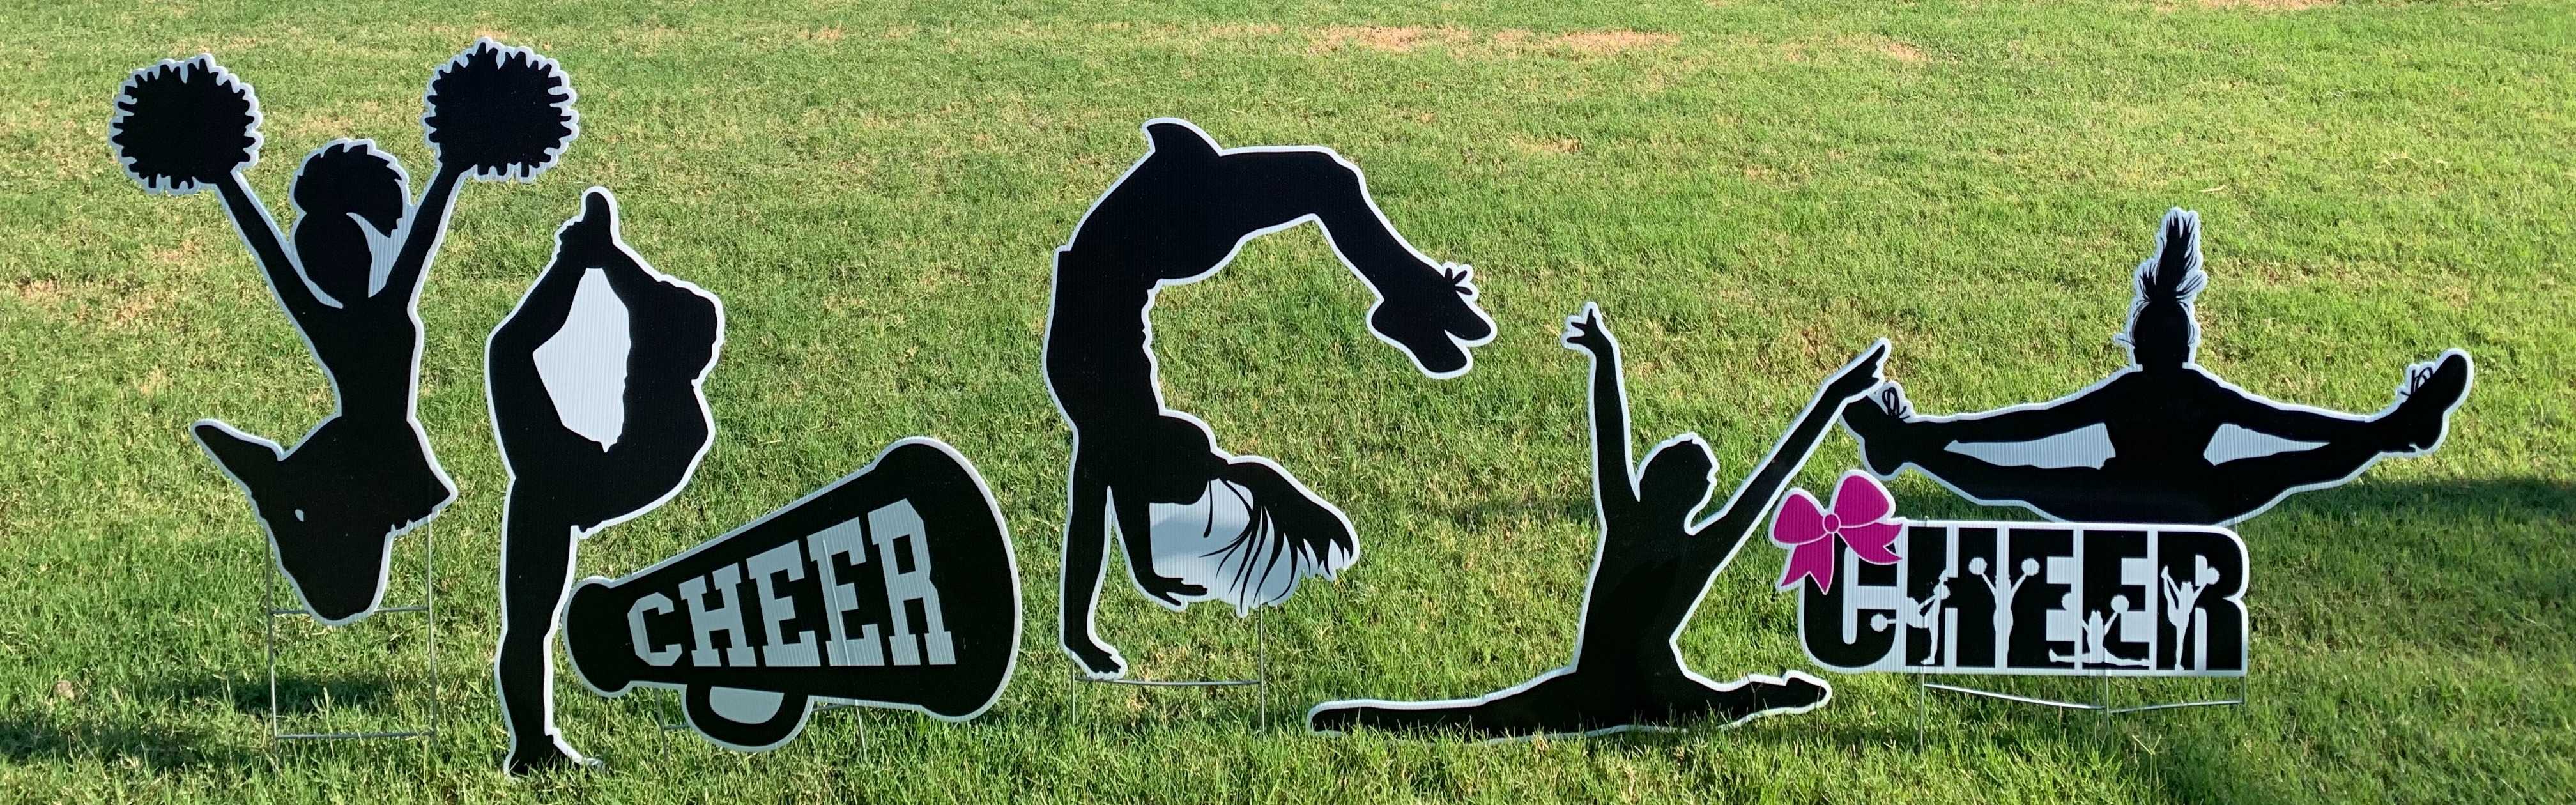 Yard card sign collection silhouette cheer 